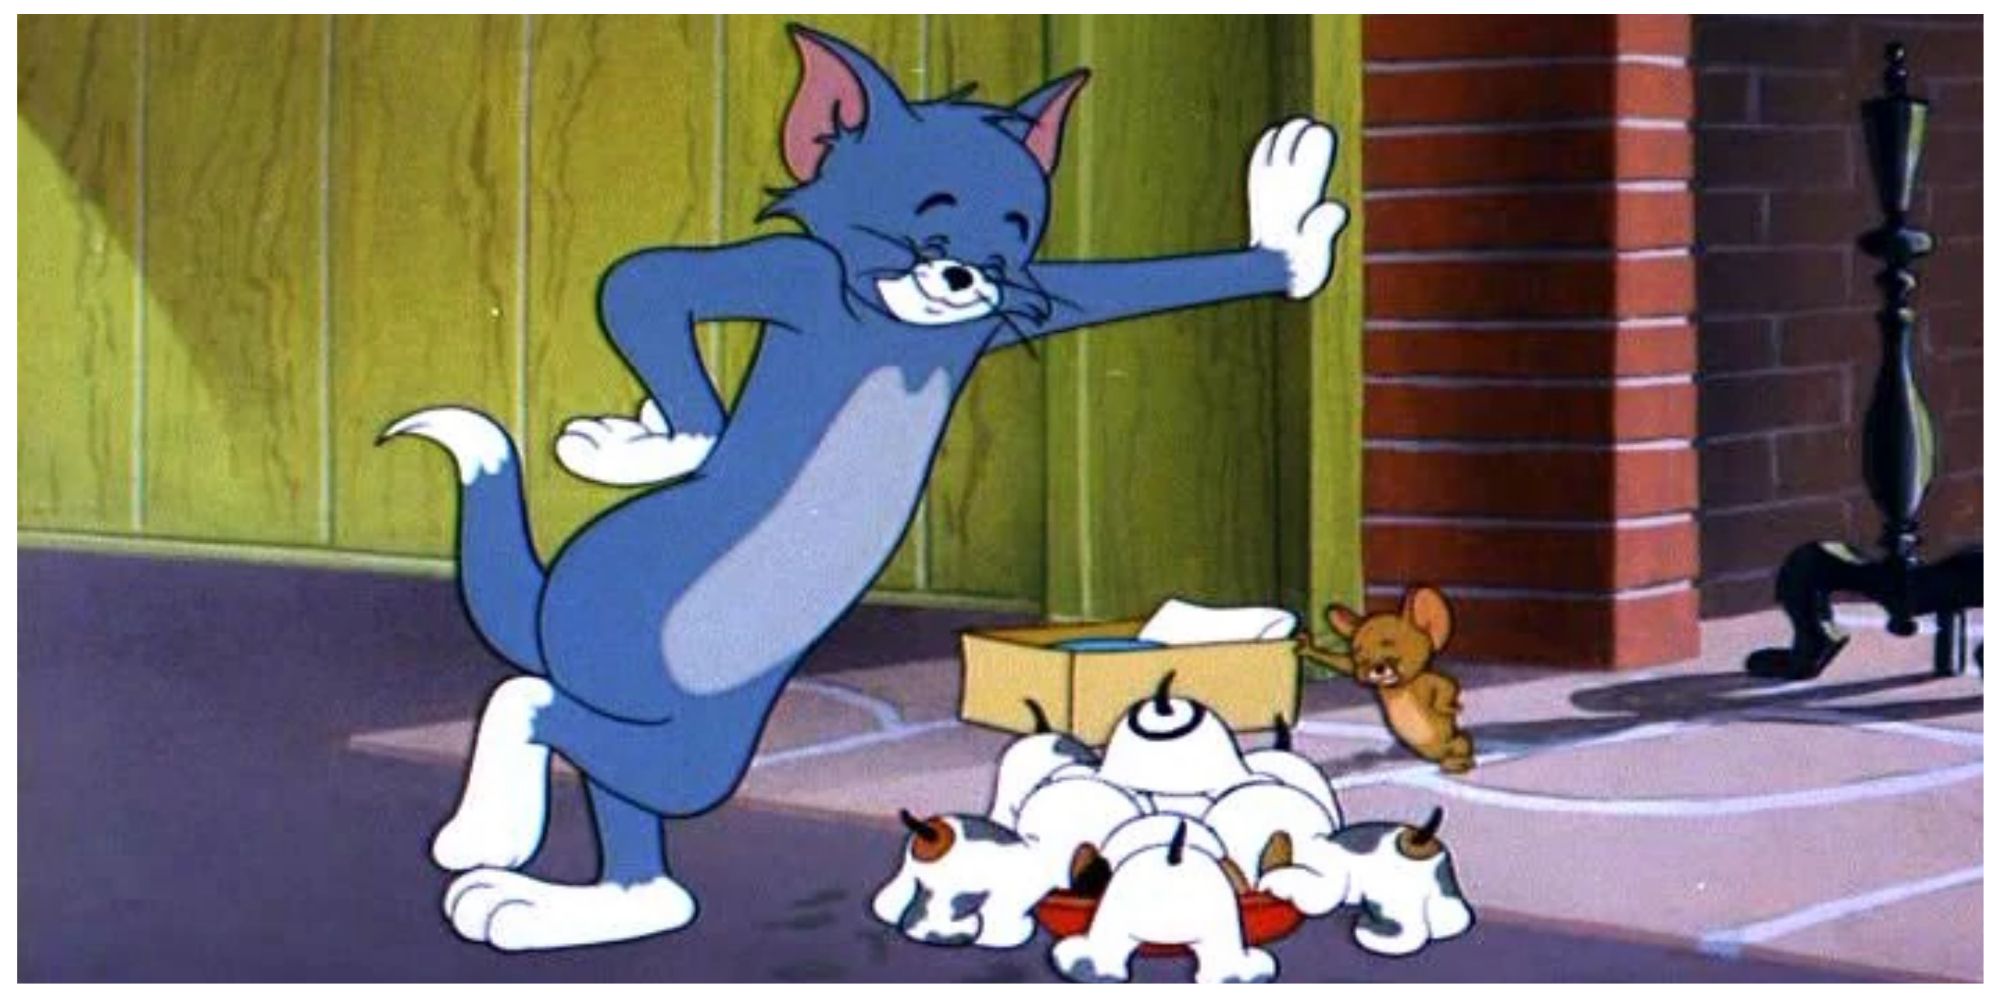 Tom and Jerry get along in the episode Puppy tale